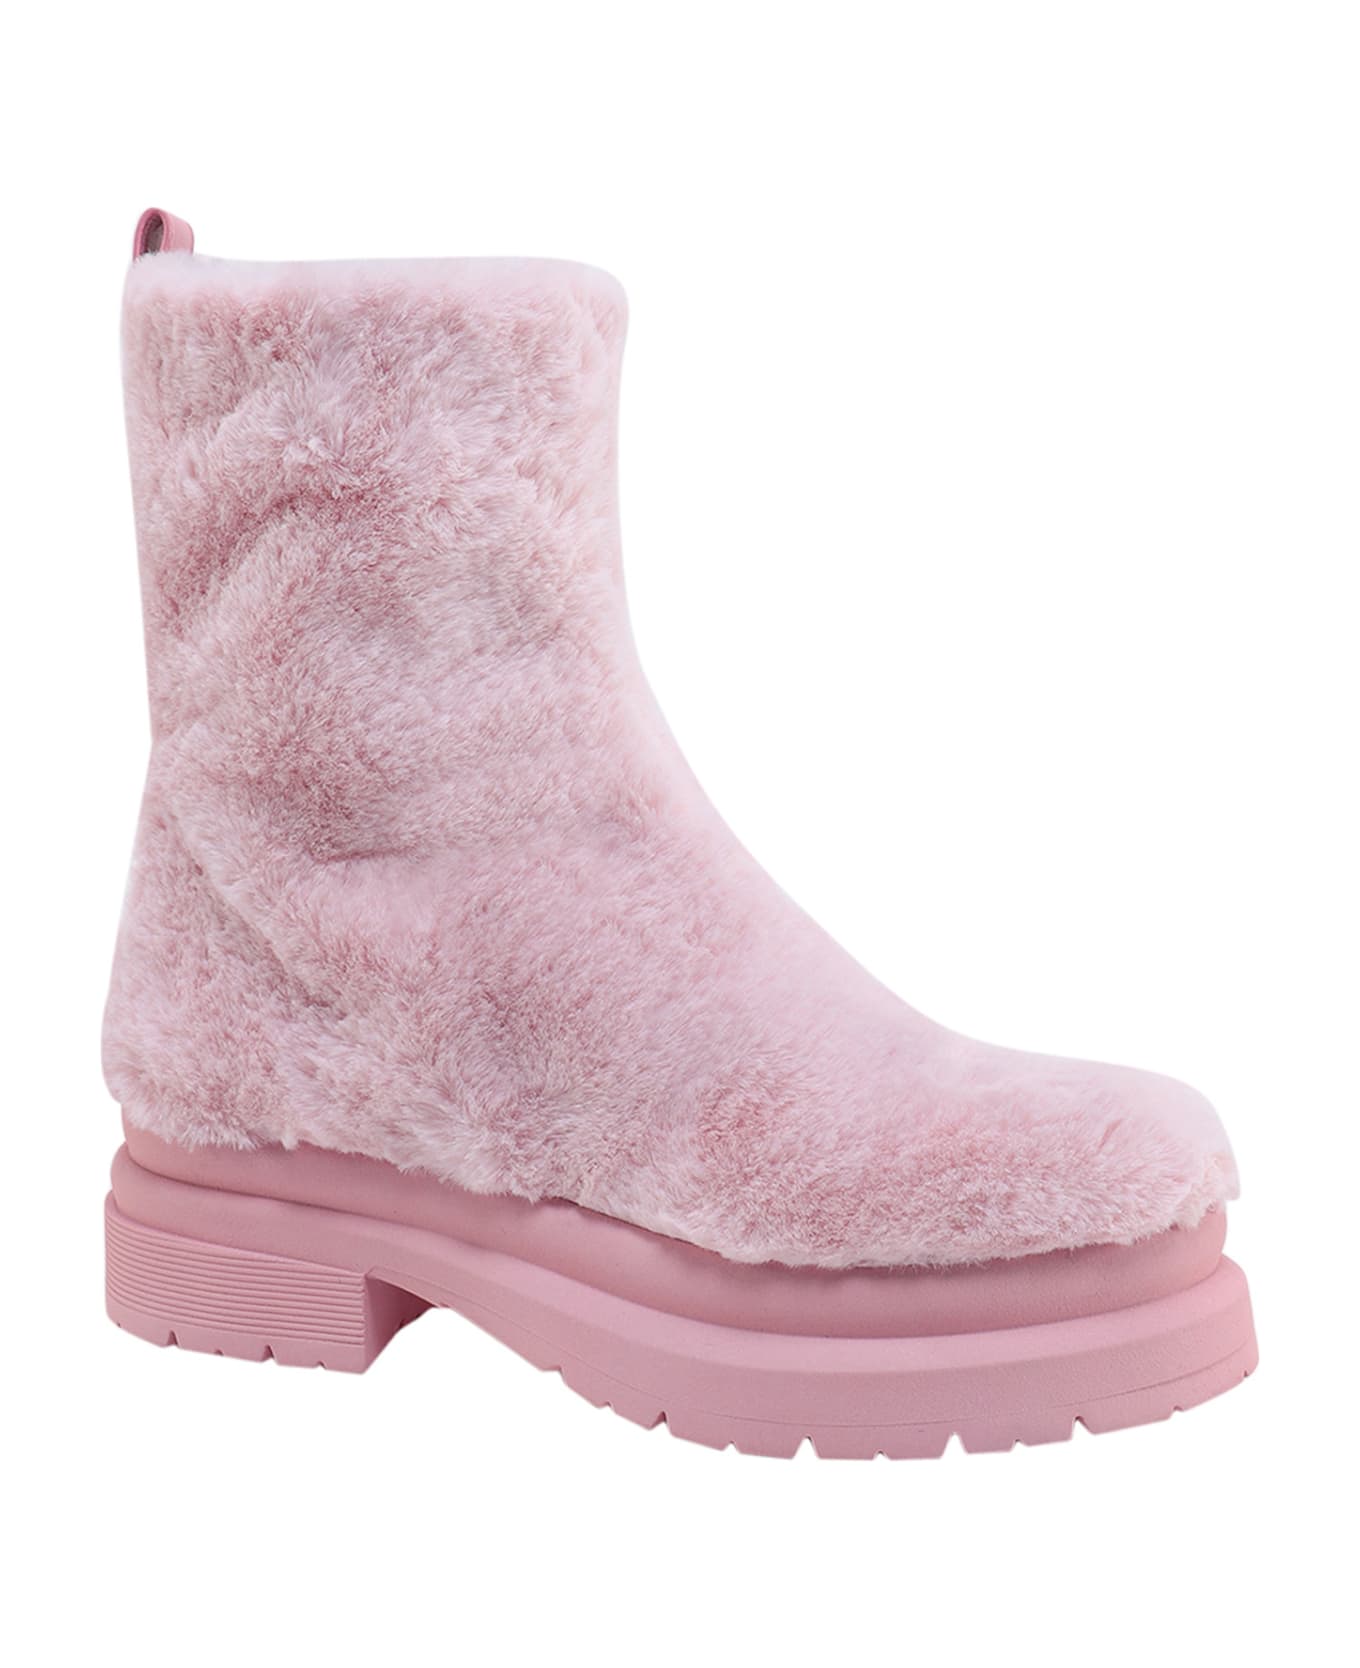 J.W. Anderson Boots - Pink